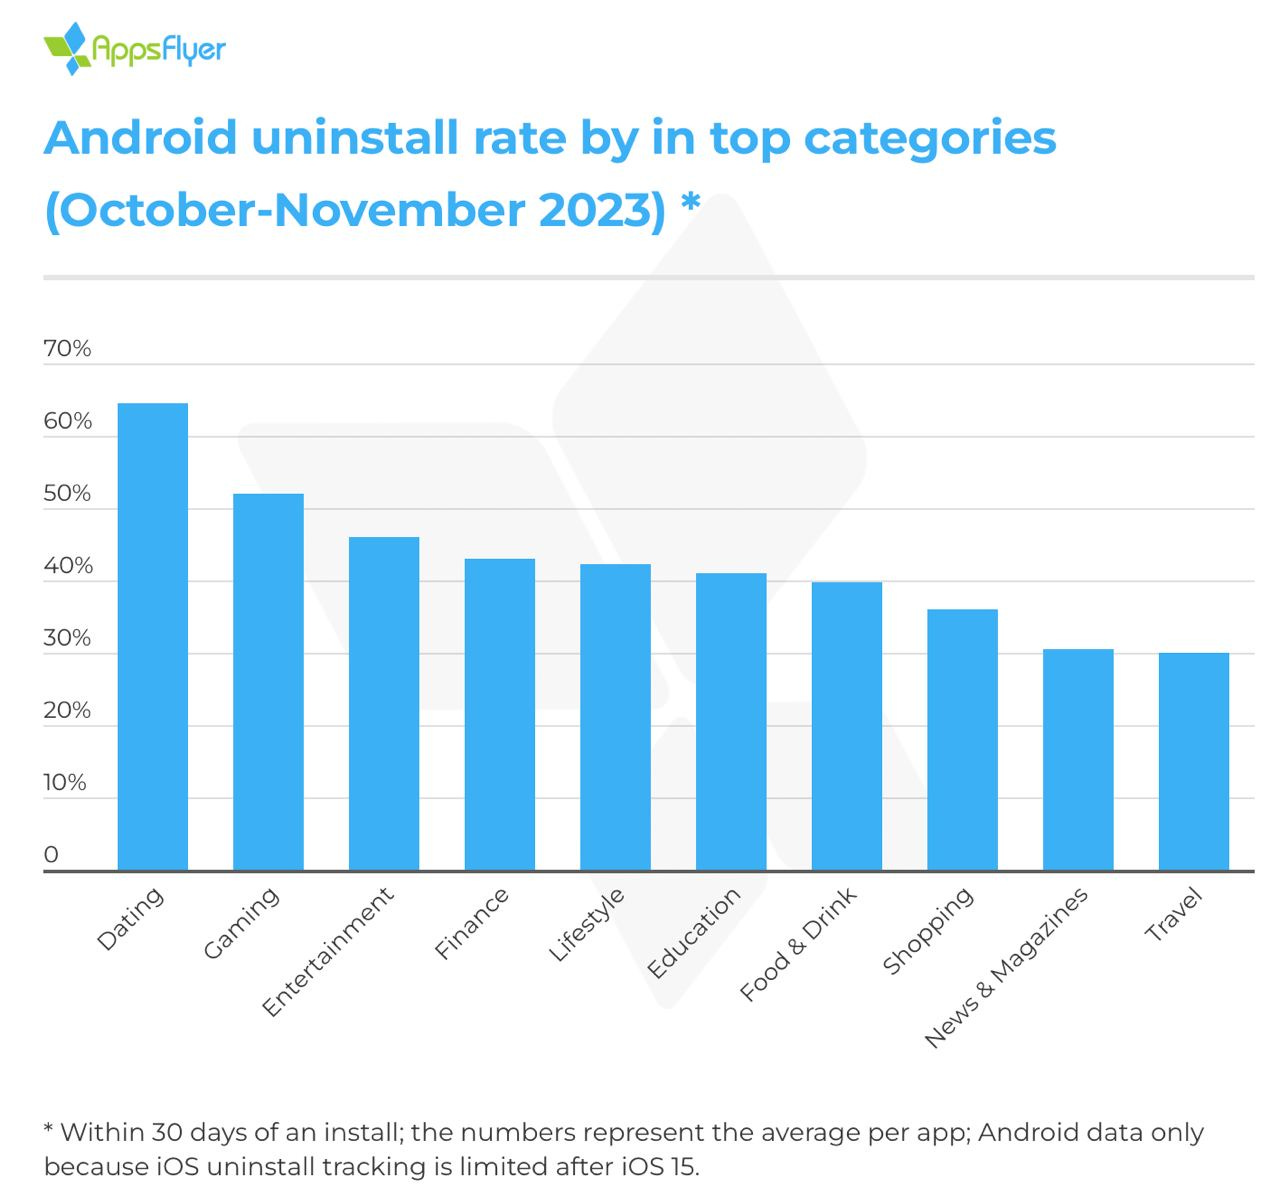 Android uninstall rate